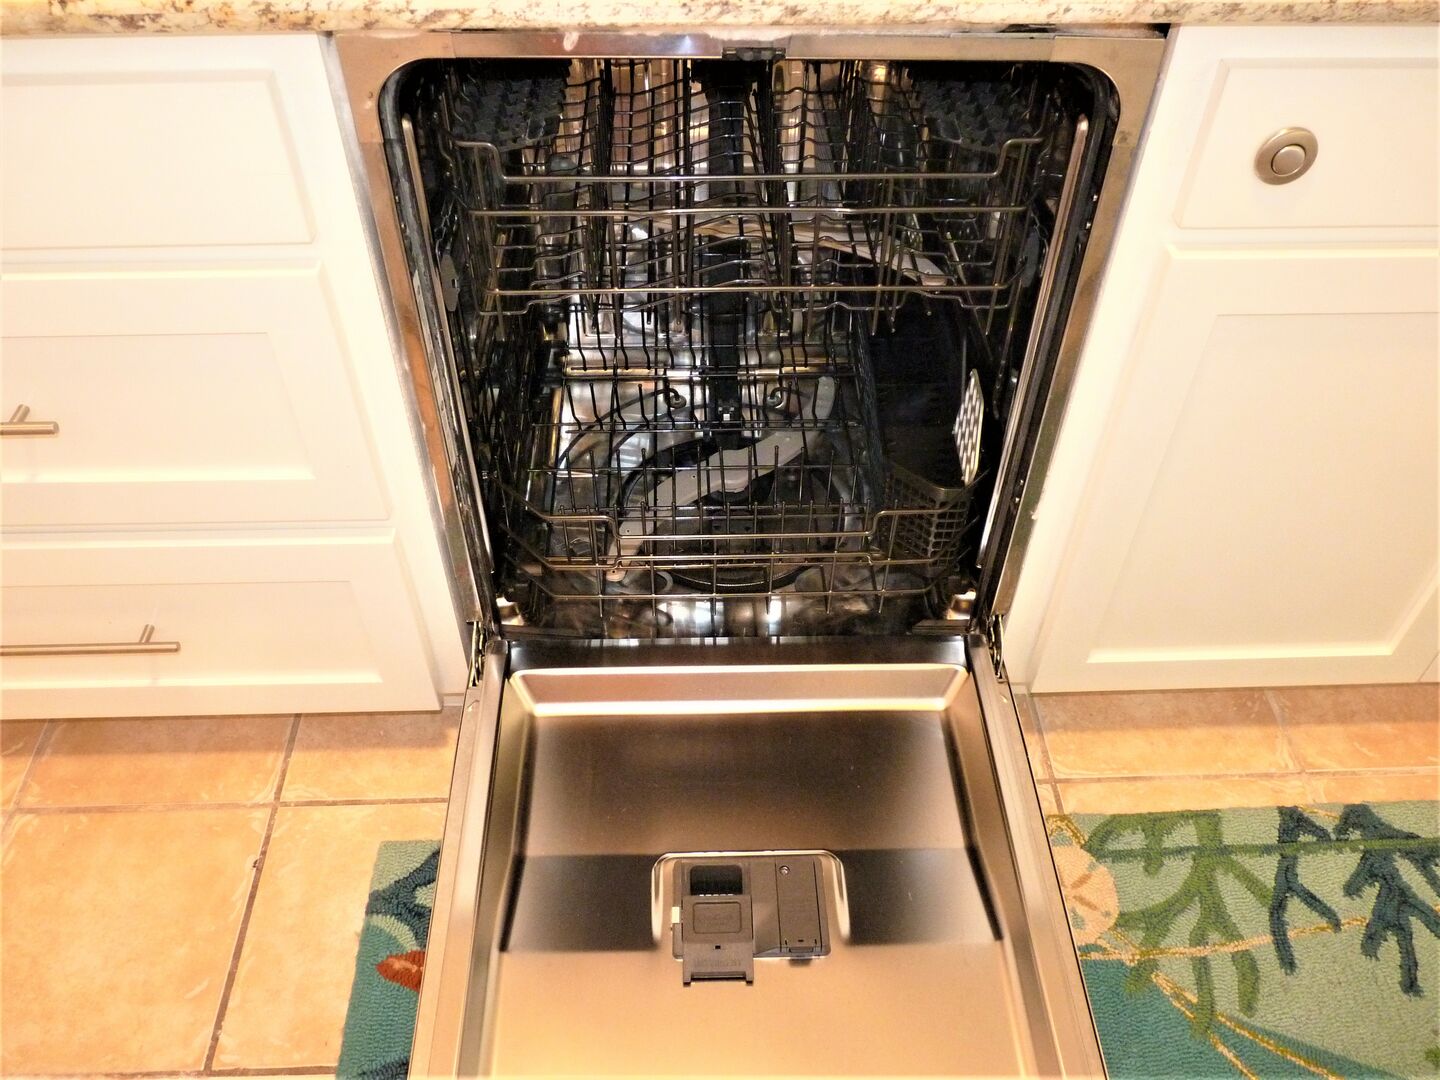 The dishwasher is clean and shiny!